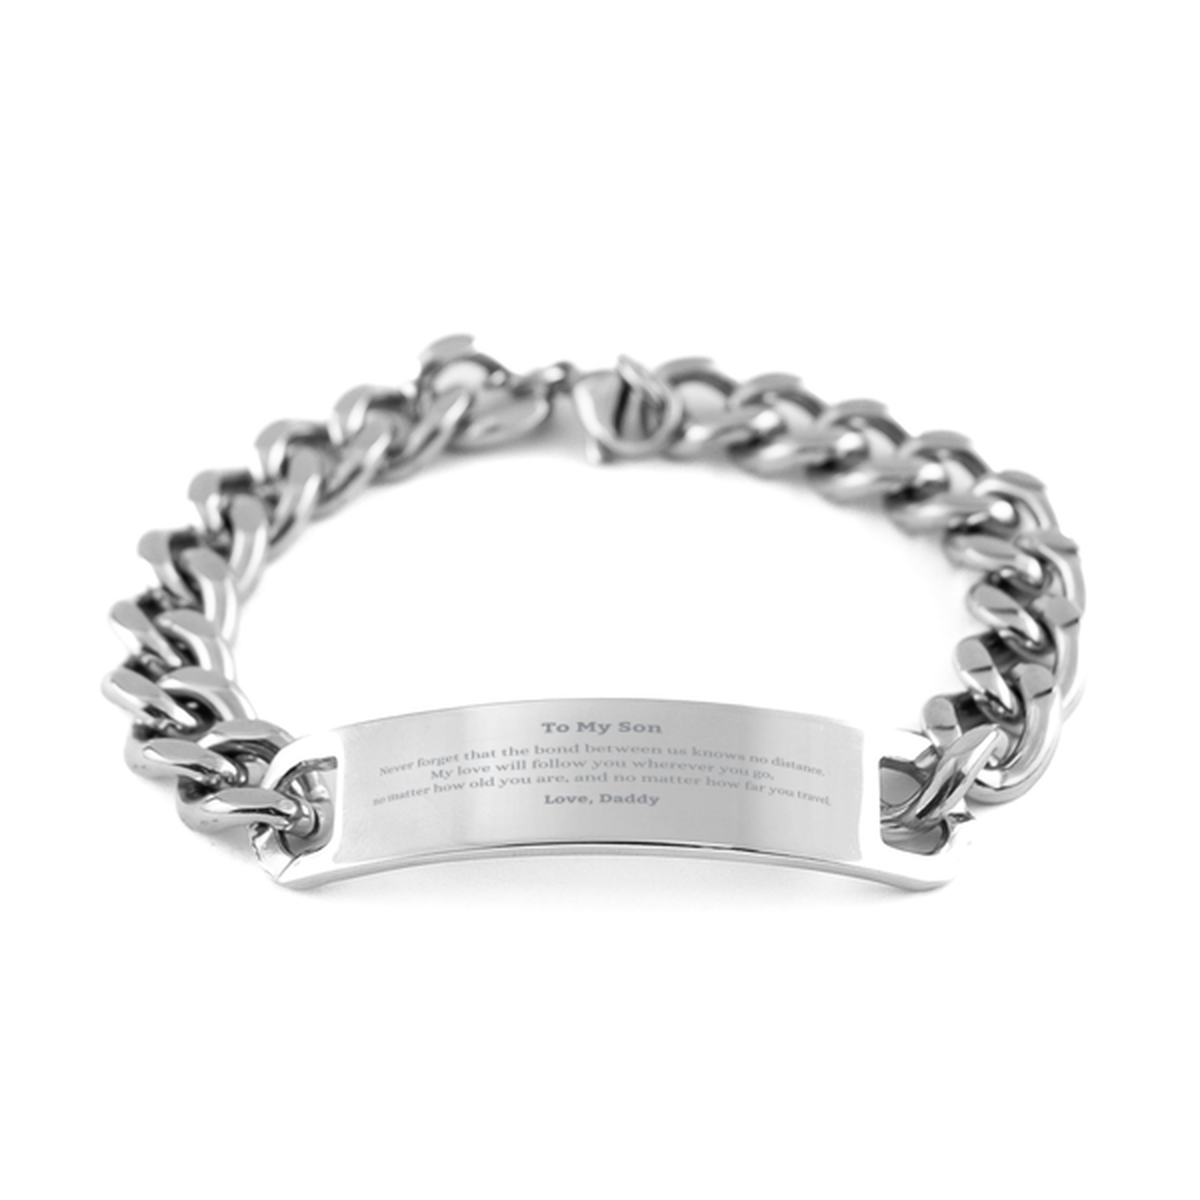 Son Birthday Gifts from Daddy, Adjustable Cuban Chain Stainless Steel Bracelet for Son Christmas Graduation Unique Gifts Son Never forget that the bond between us knows no distance. Love, Daddy